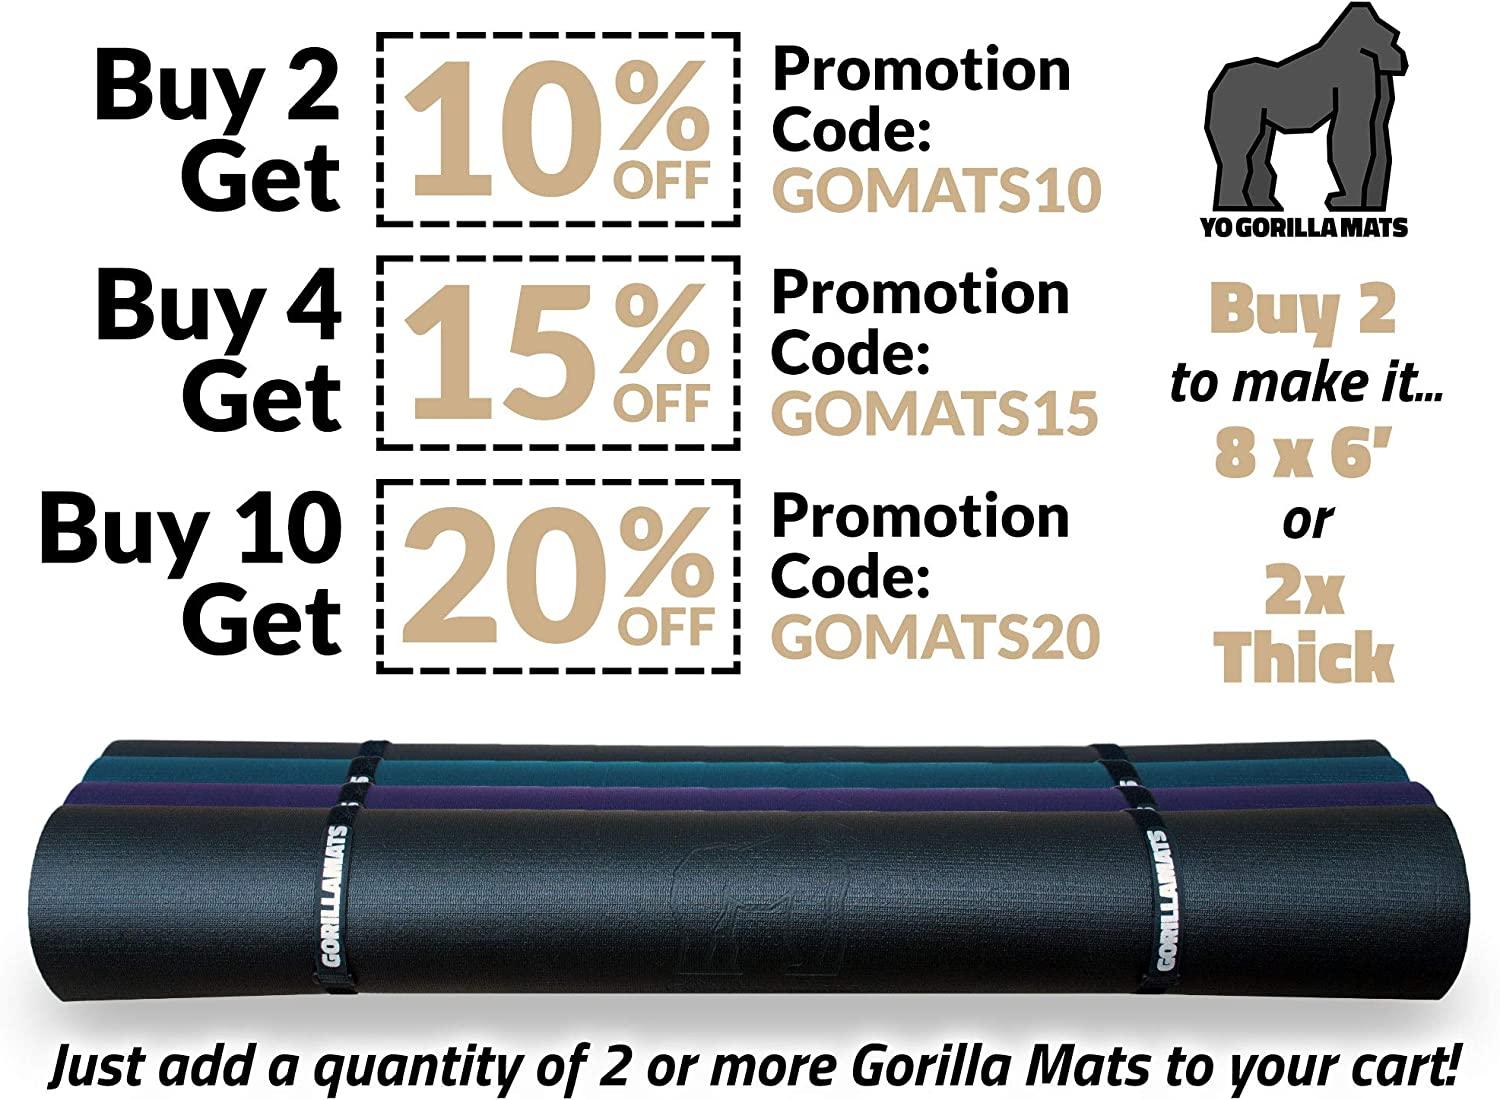 Gorilla Mats Premium Extra Large Yoga Mat – 12' x 6' x 8mm Extra Thick &  Ultra Comfortable, Non-Toxic, Non-Slip Barefoot Exercise Mat – Works Great  on